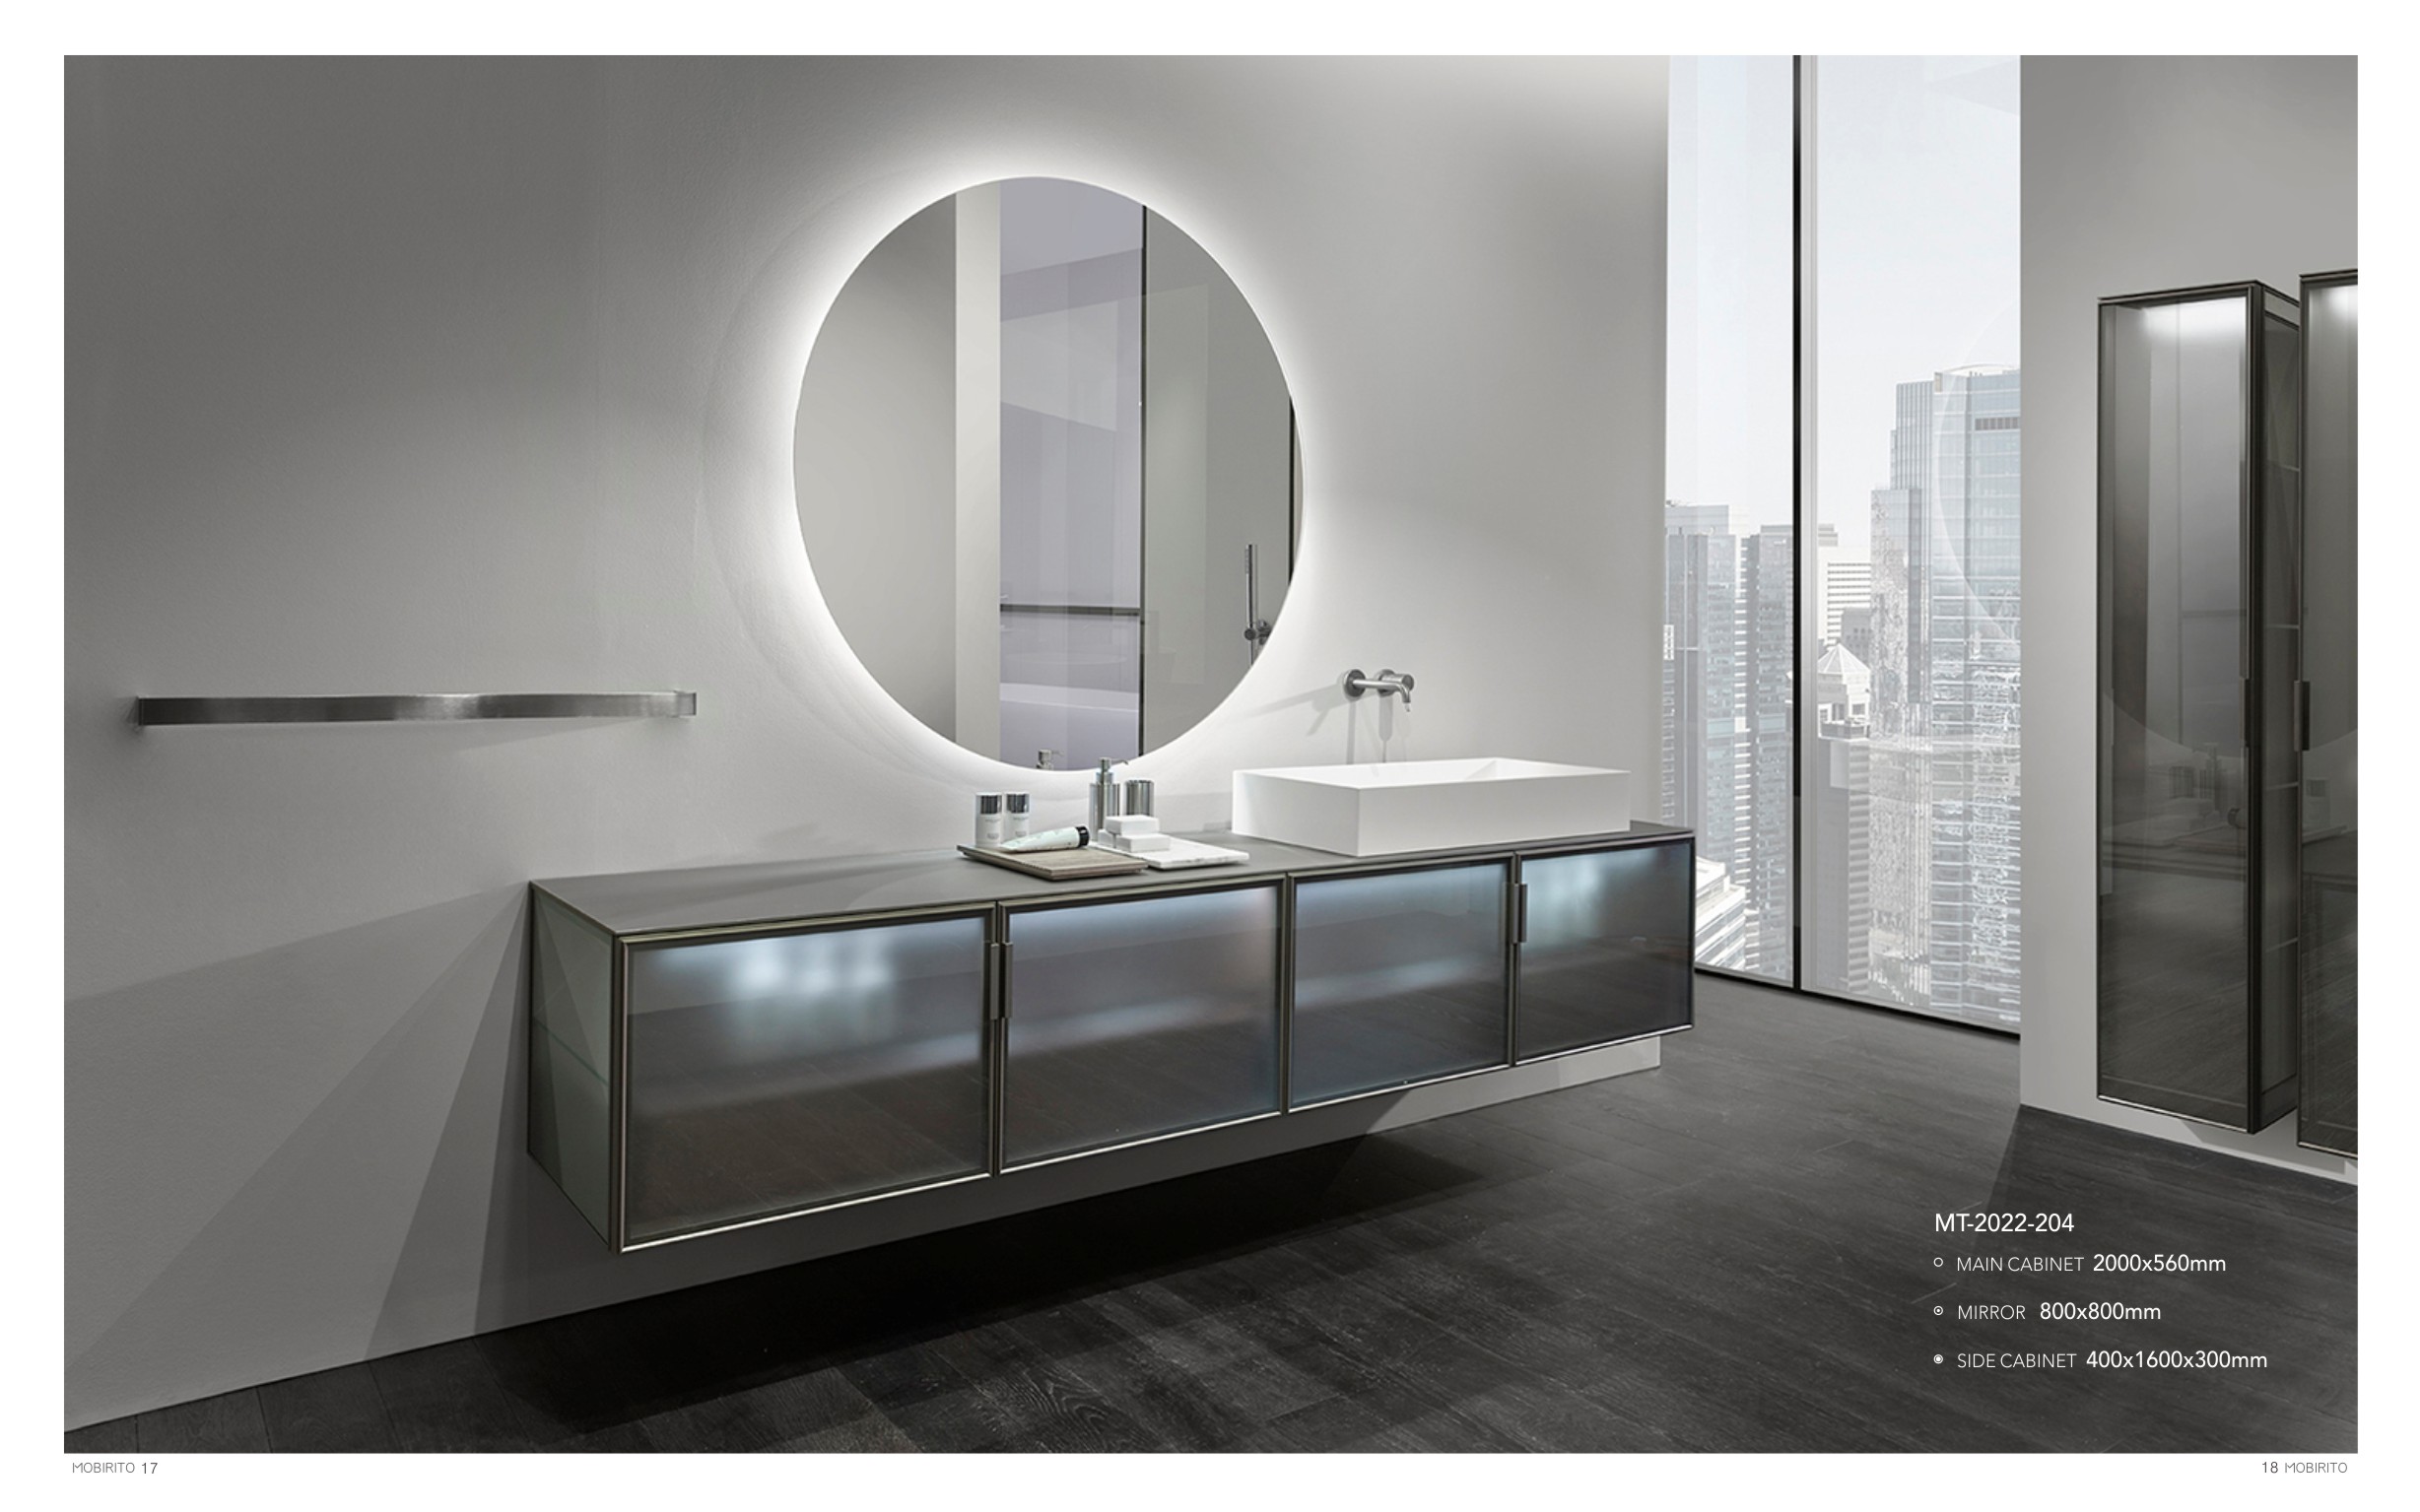 Analysis of the advantages and disadvantages of wall-mounted bathroom cabinets